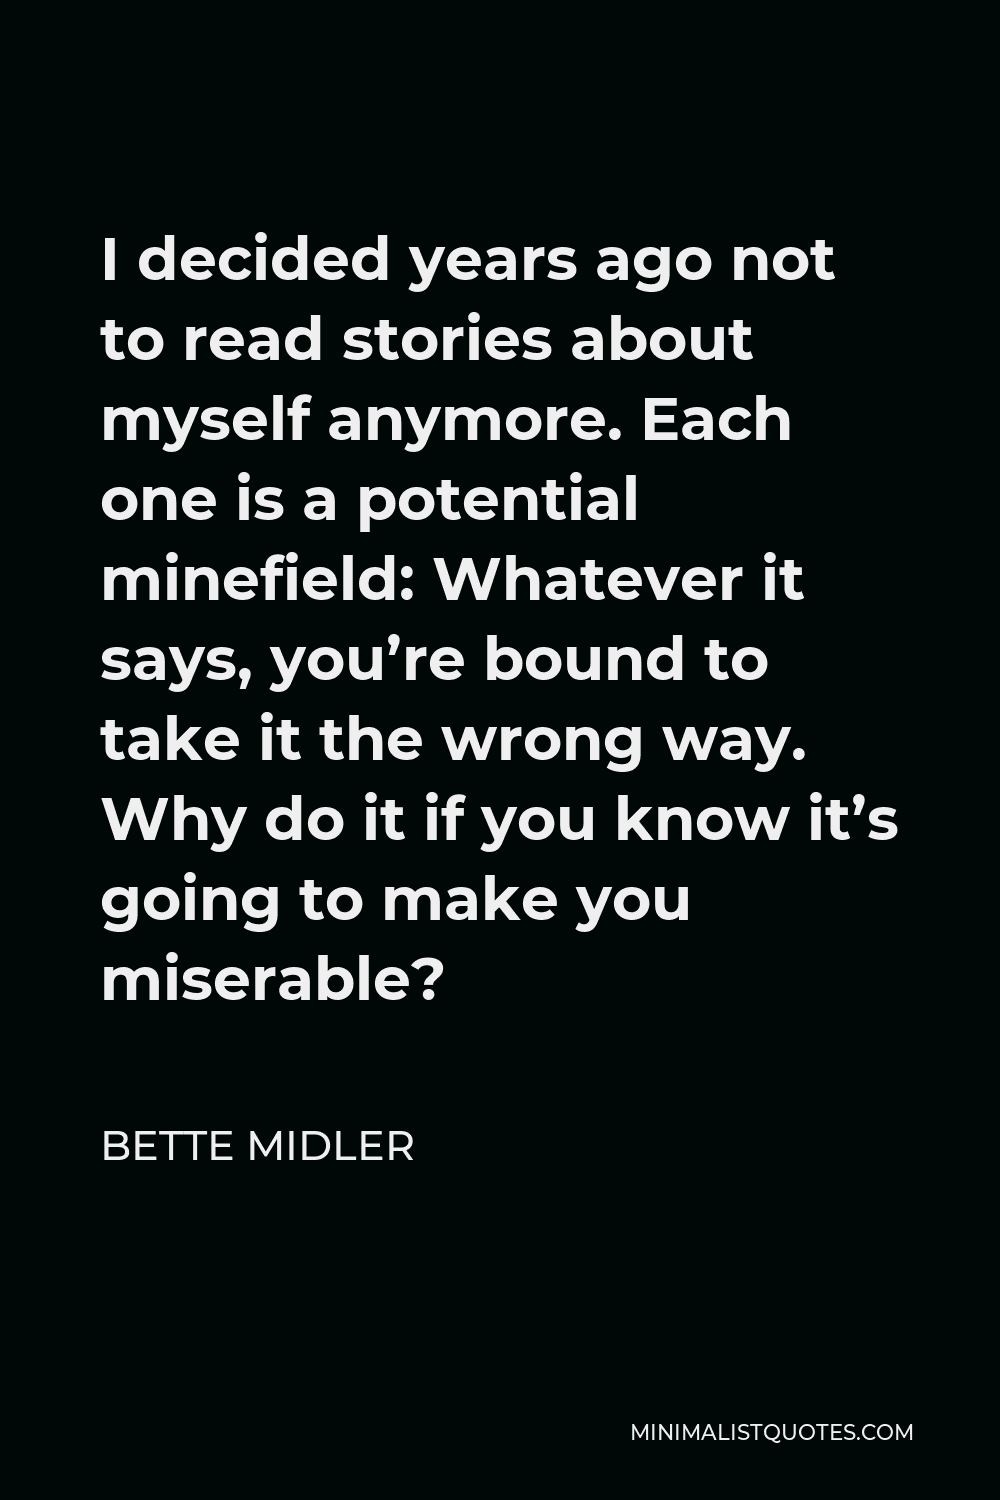 Bette Midler Quote - I decided years ago not to read stories about myself anymore. Each one is a potential minefield: Whatever it says, you’re bound to take it the wrong way. Why do it if you know it’s going to make you miserable?